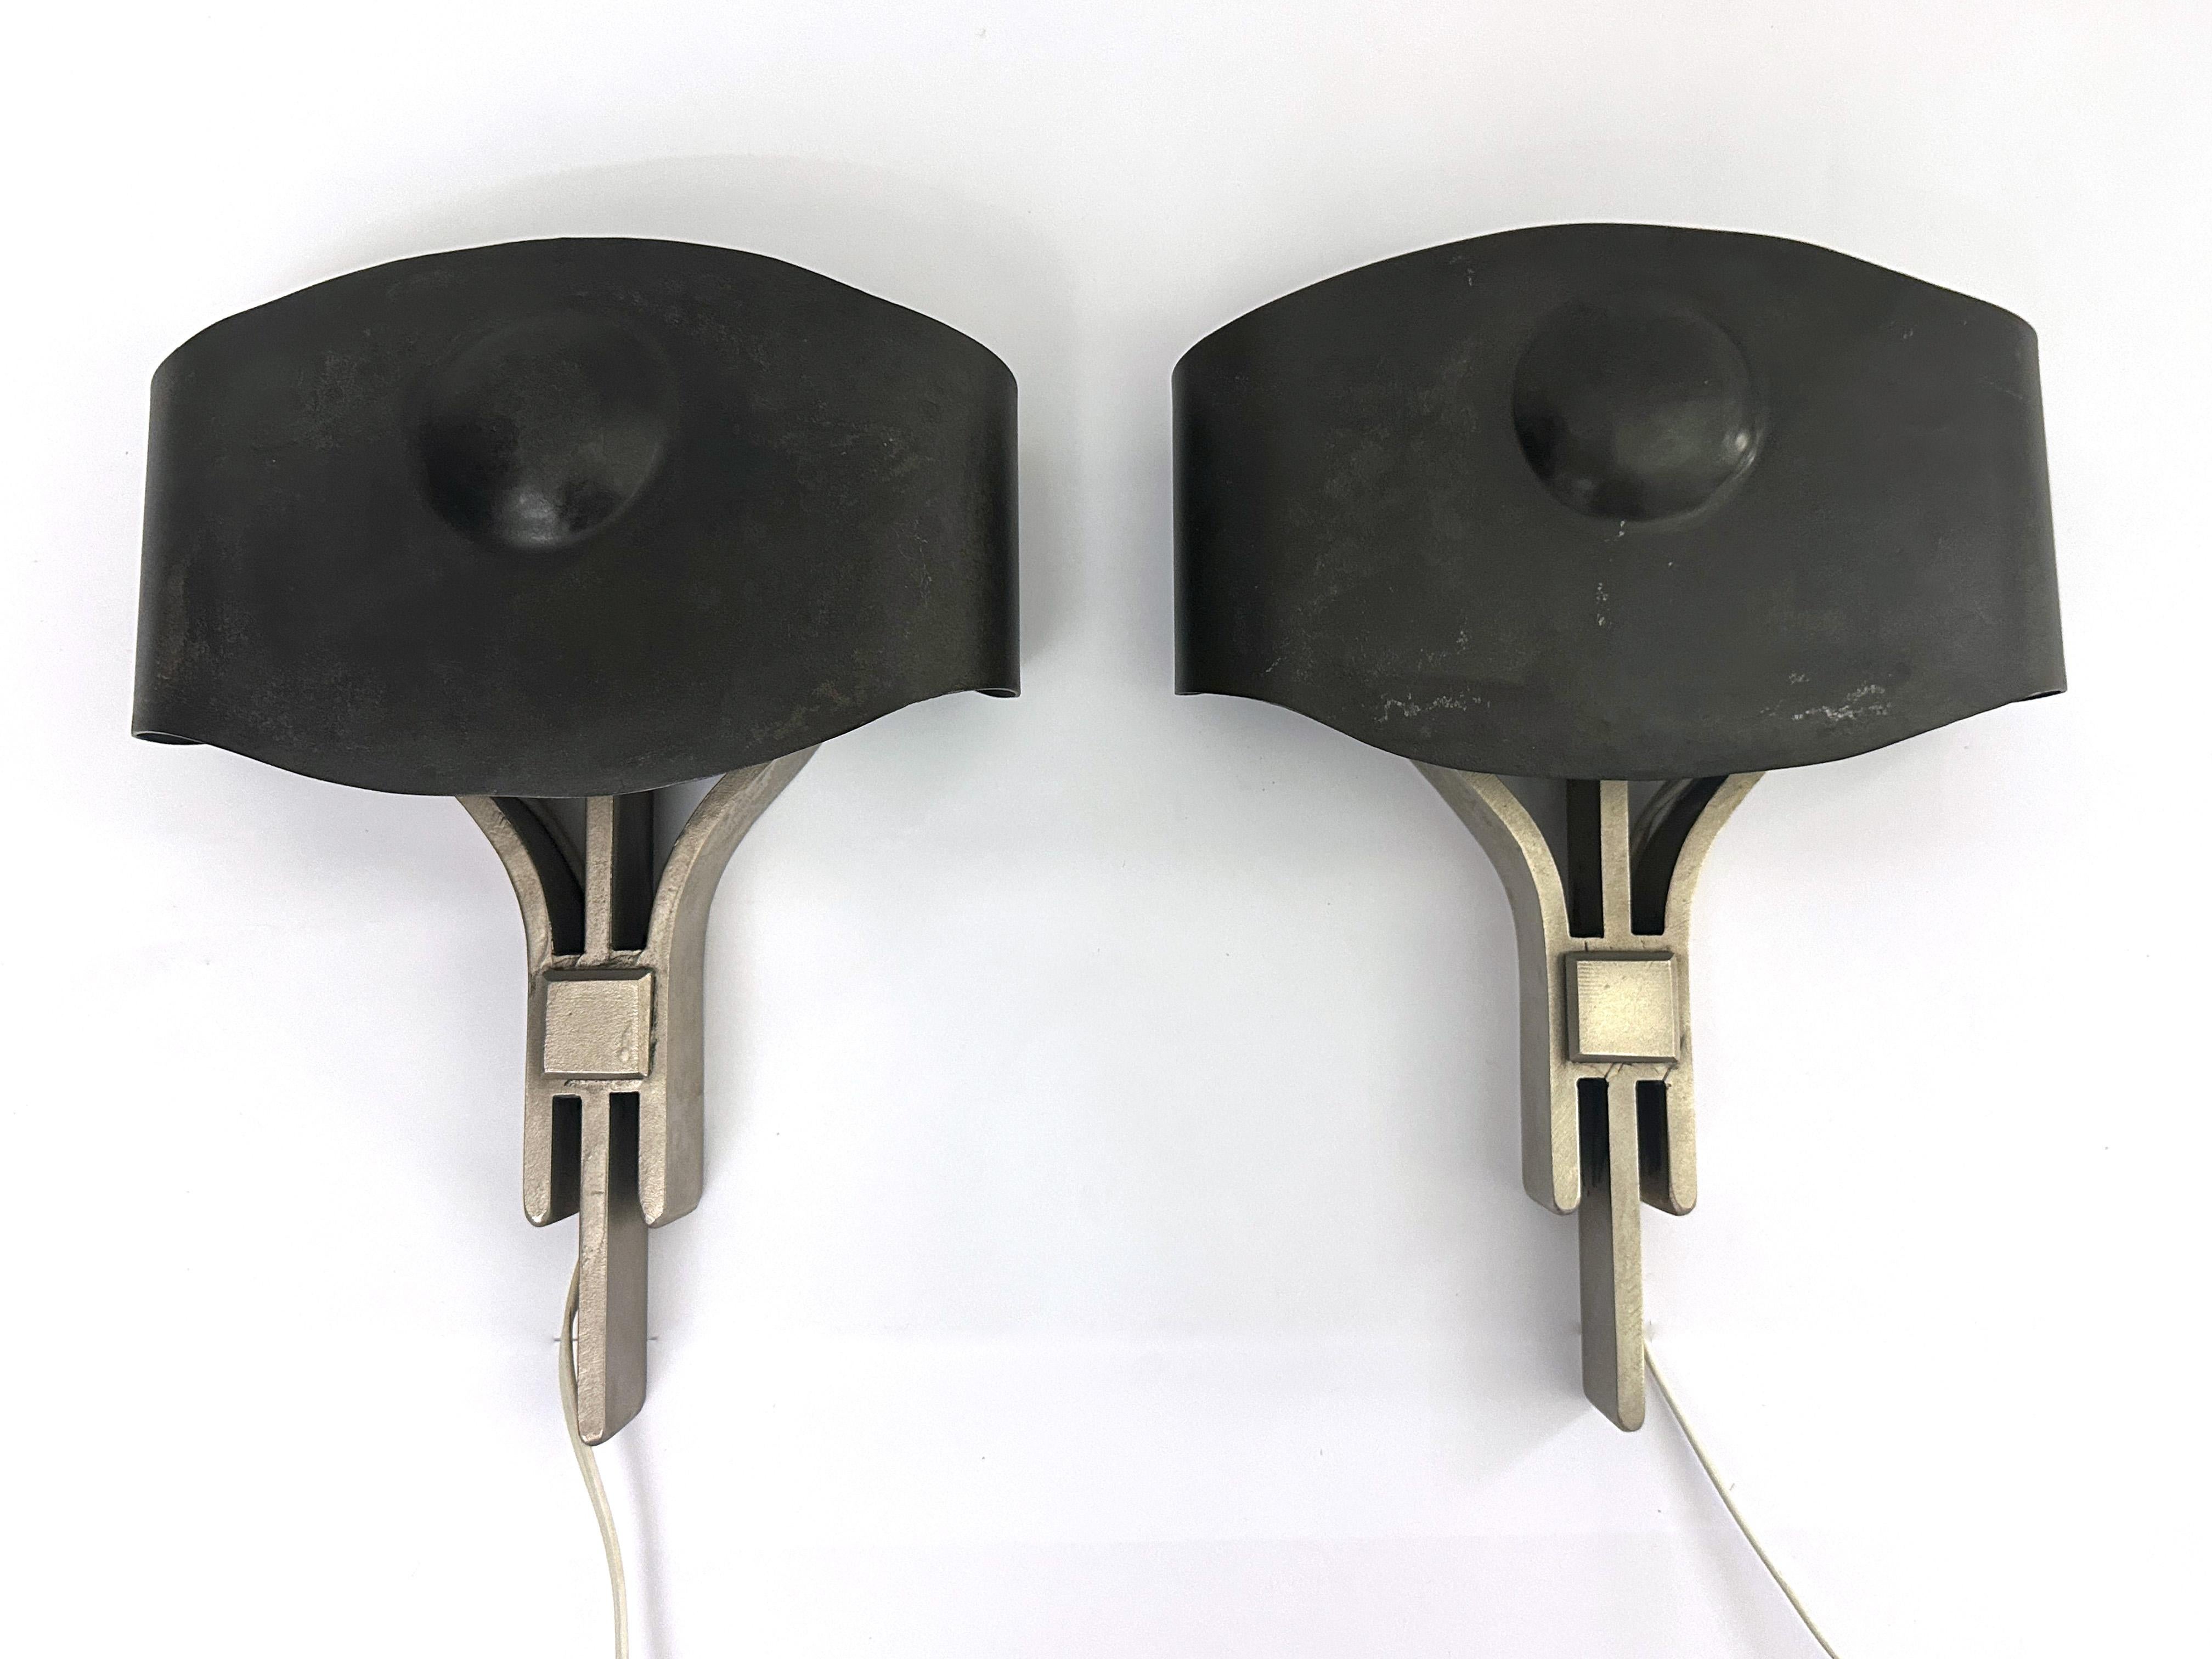 A pair of modern indutrial wall sconces deisign by Juan Montoya in 2003. This unique pair is made out of steel. Each body has a combination of brushed and patina steel to create contrast in the material. making a beautiful wall decorative piece when